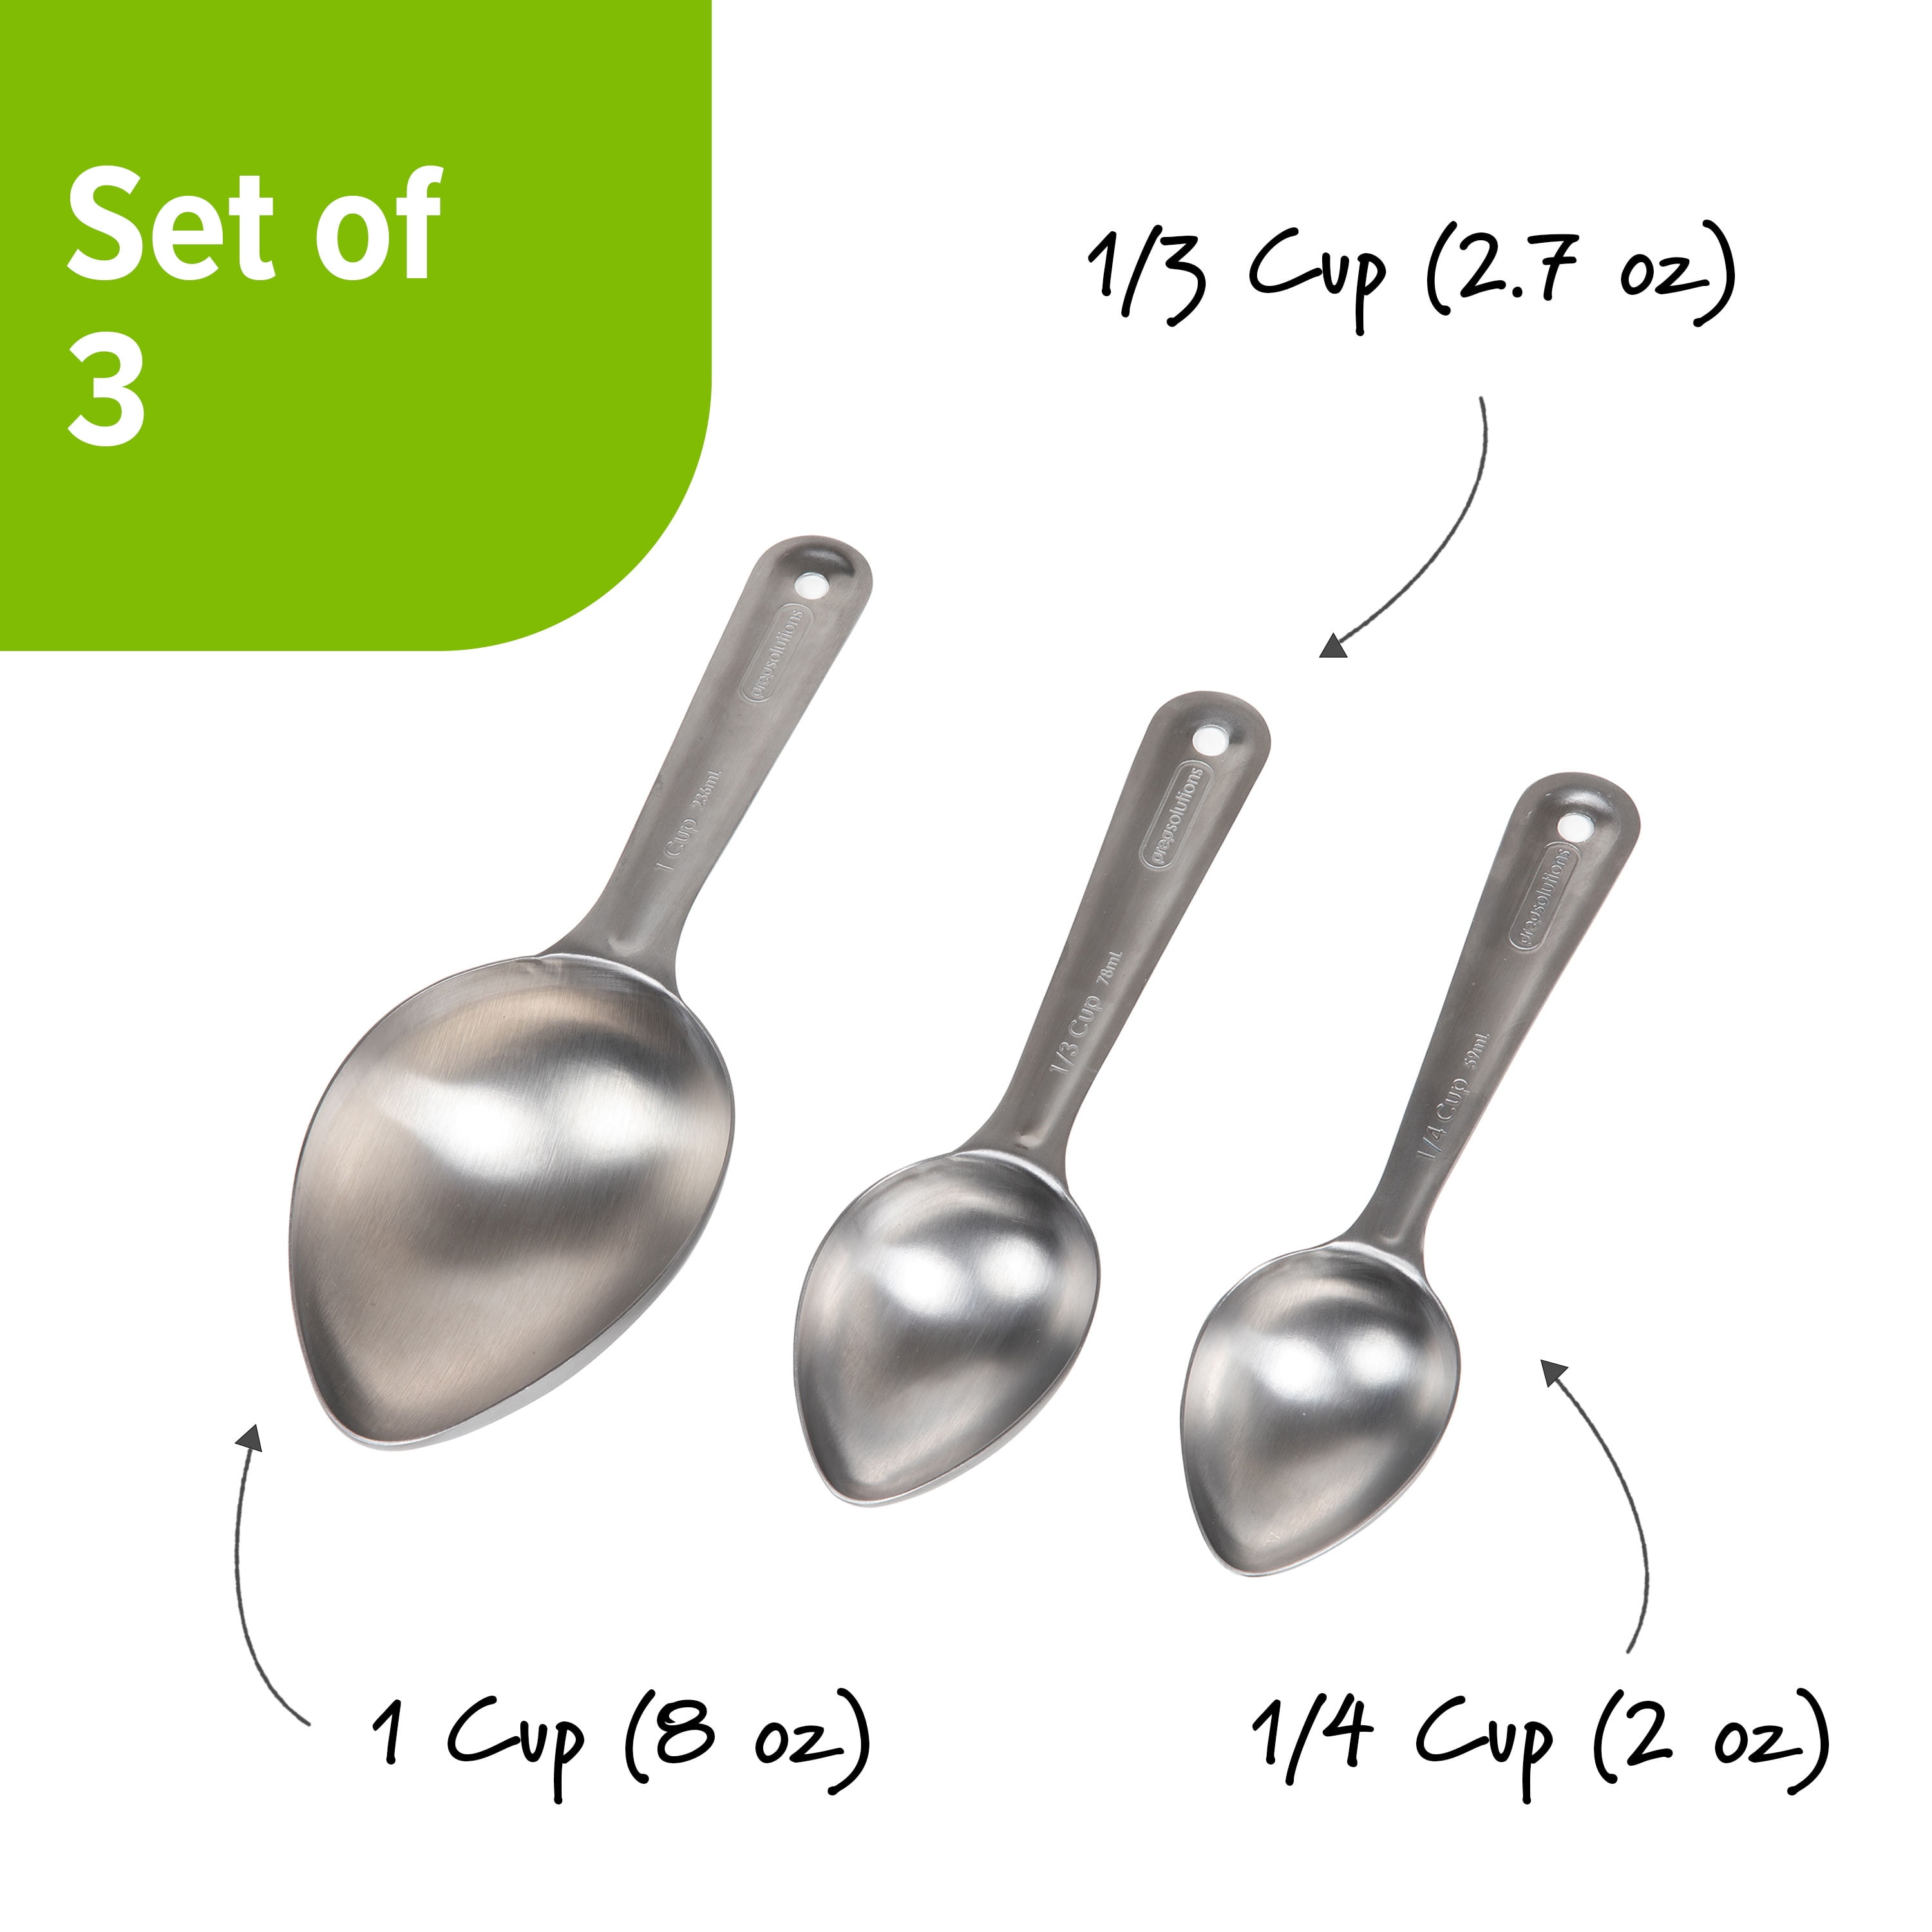 Last Confection 7pc Stainless Steel Measuring Cup Set - Includes 1